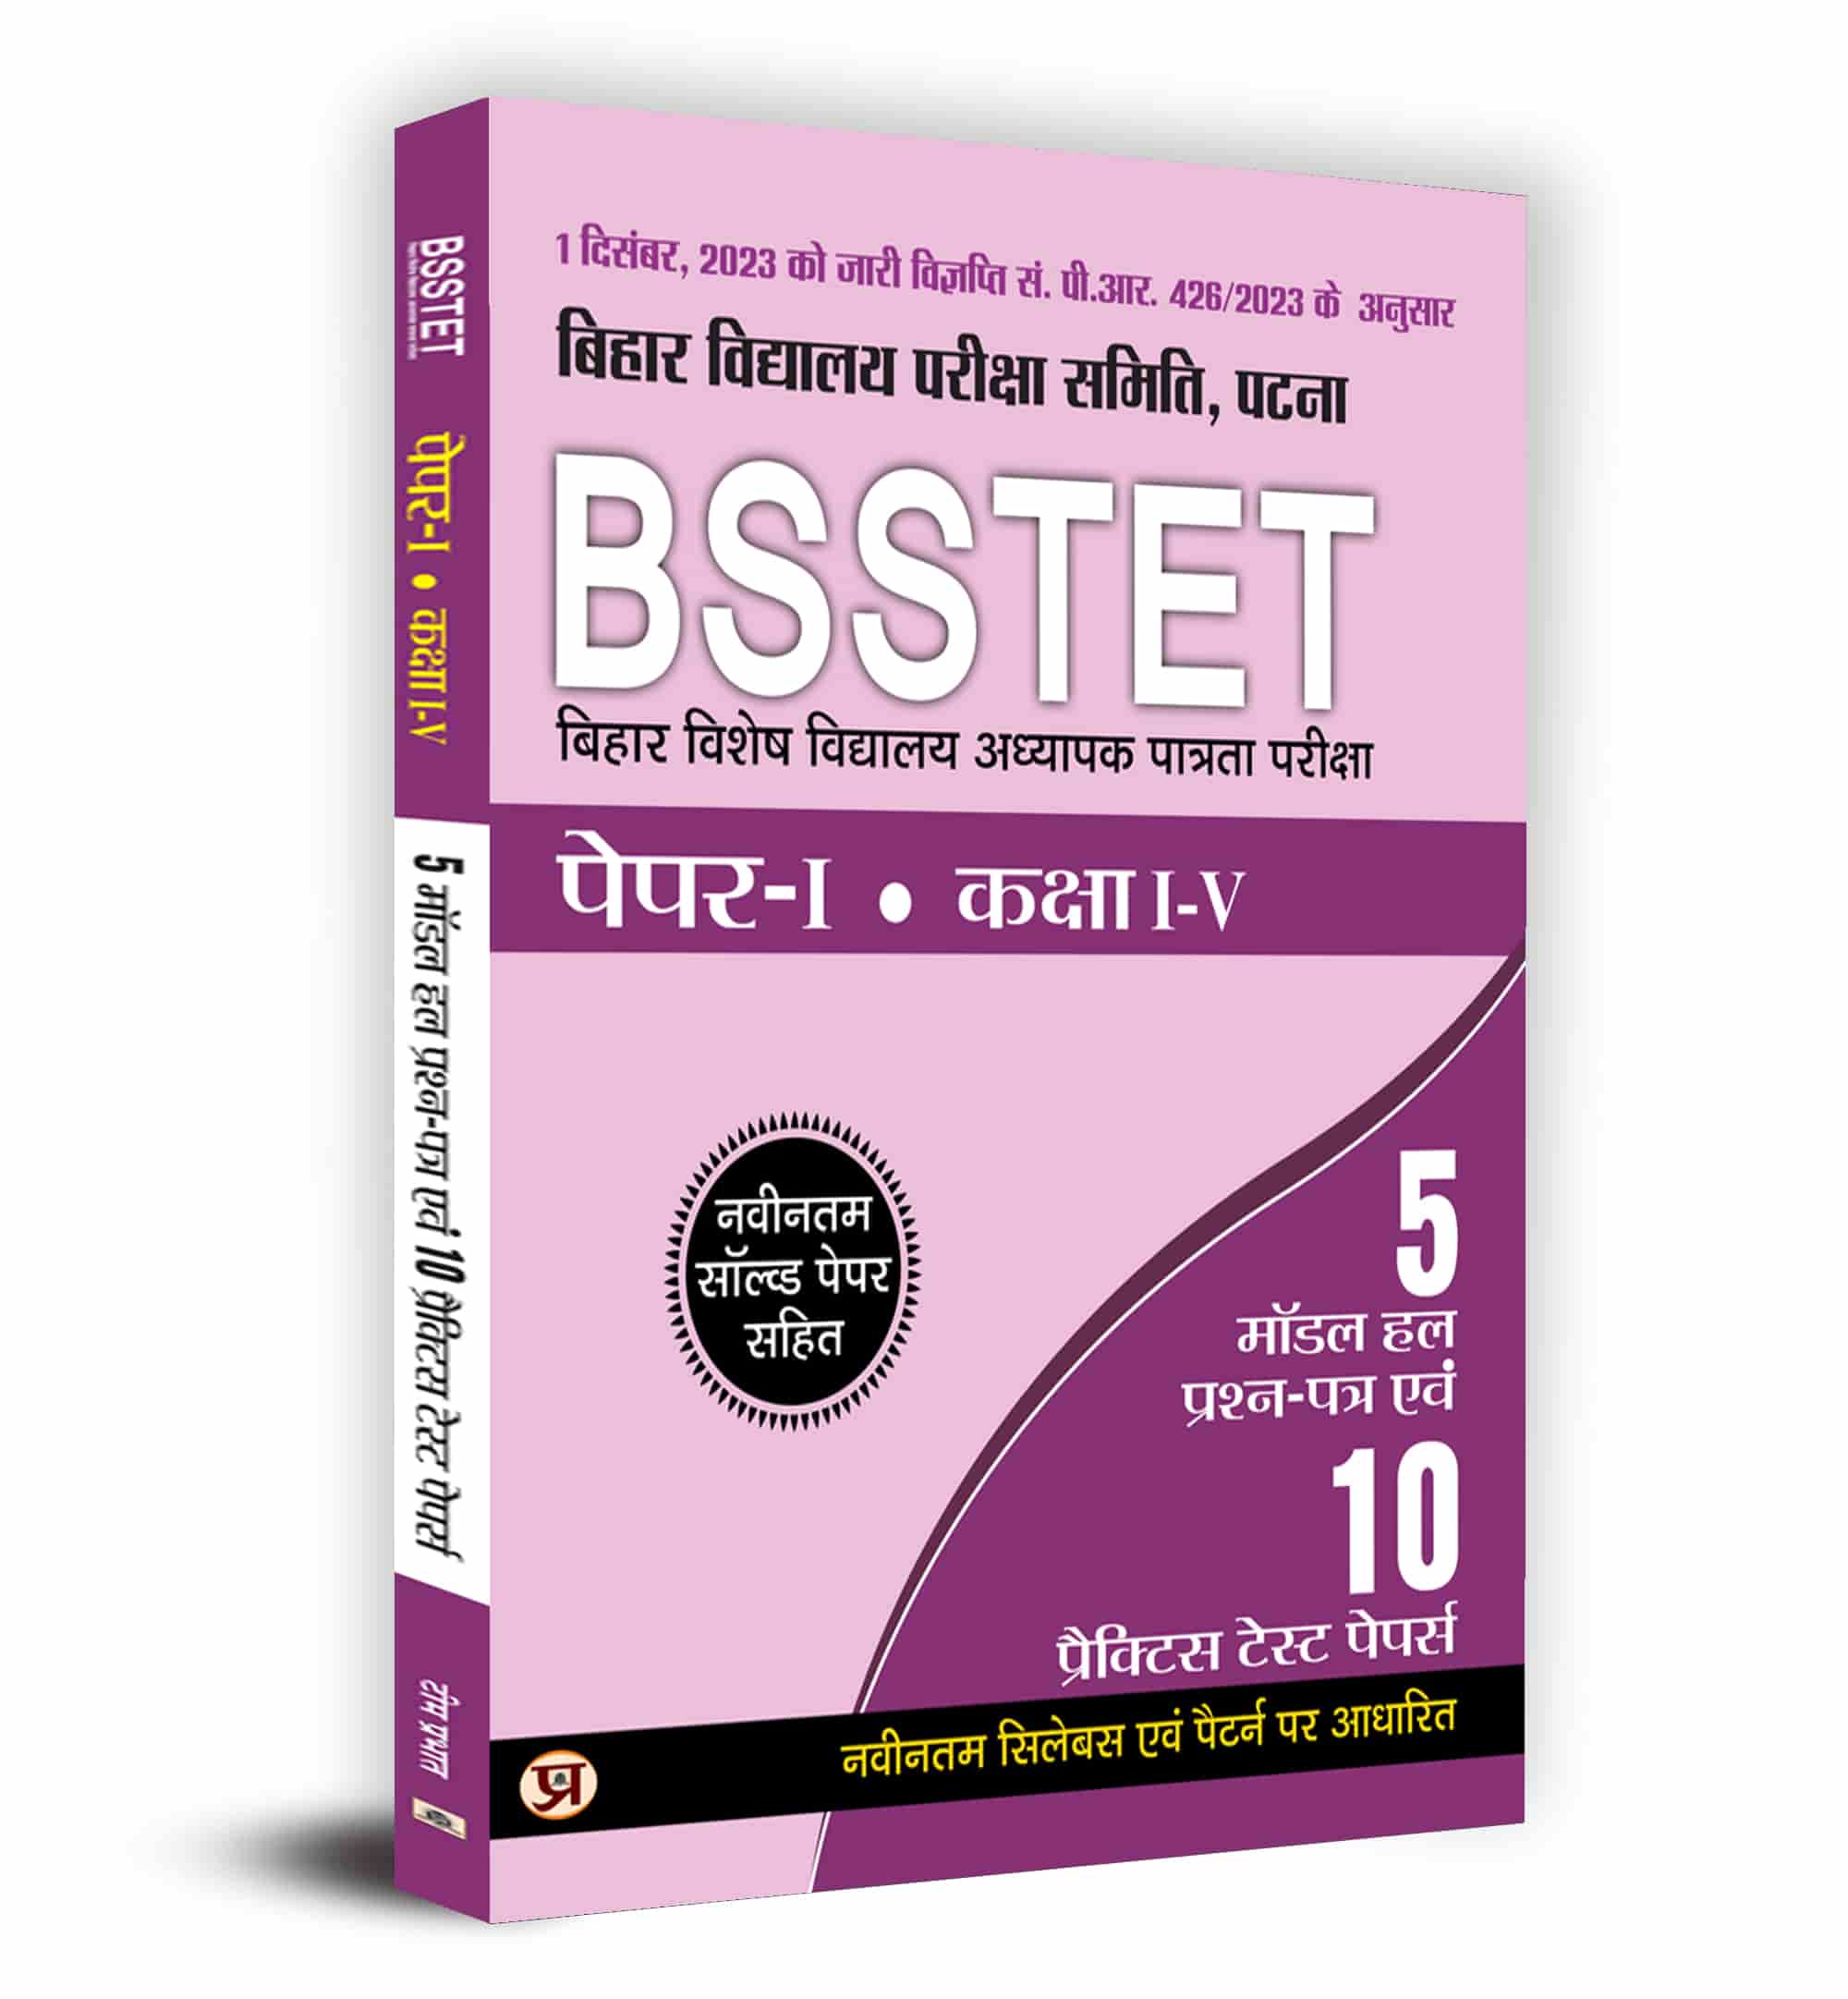 BSSTET Bihar Special School Teacher Eligibility Test Class 1-5 Paper-1 | 5 Model Solved Question Papers and 10 Practice Sets Book in Hindi